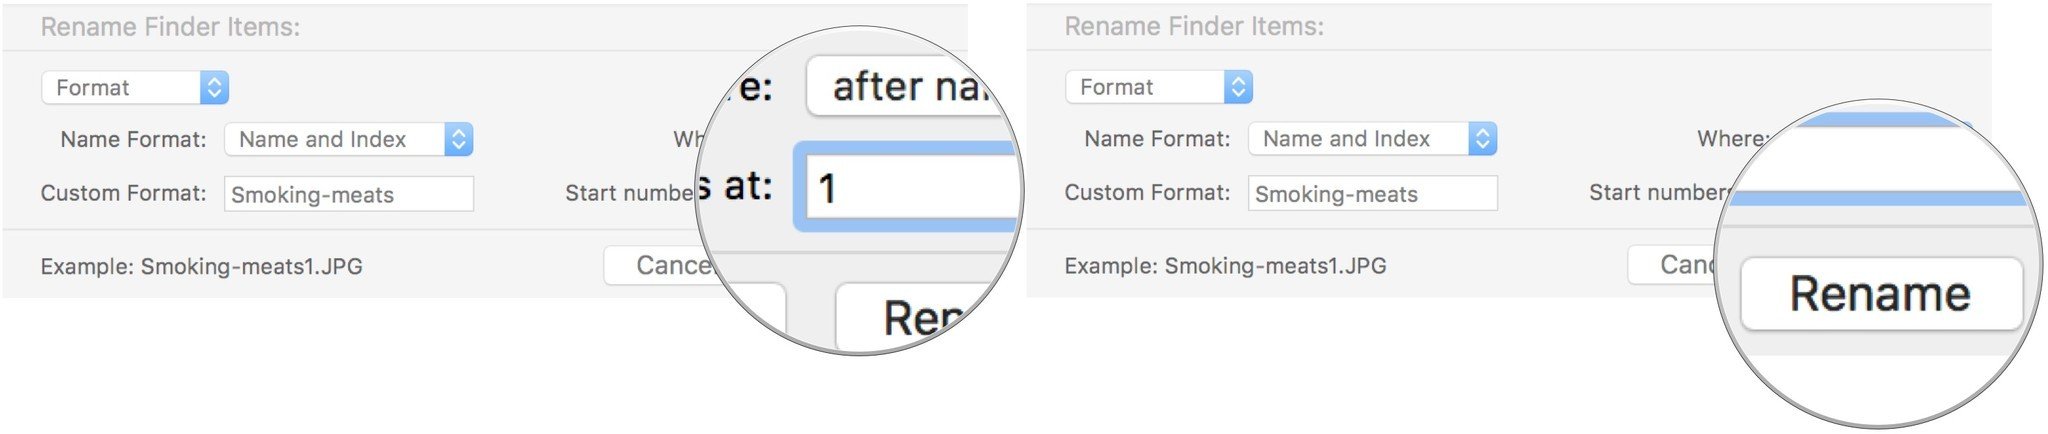 Select a starting number, then click Rename